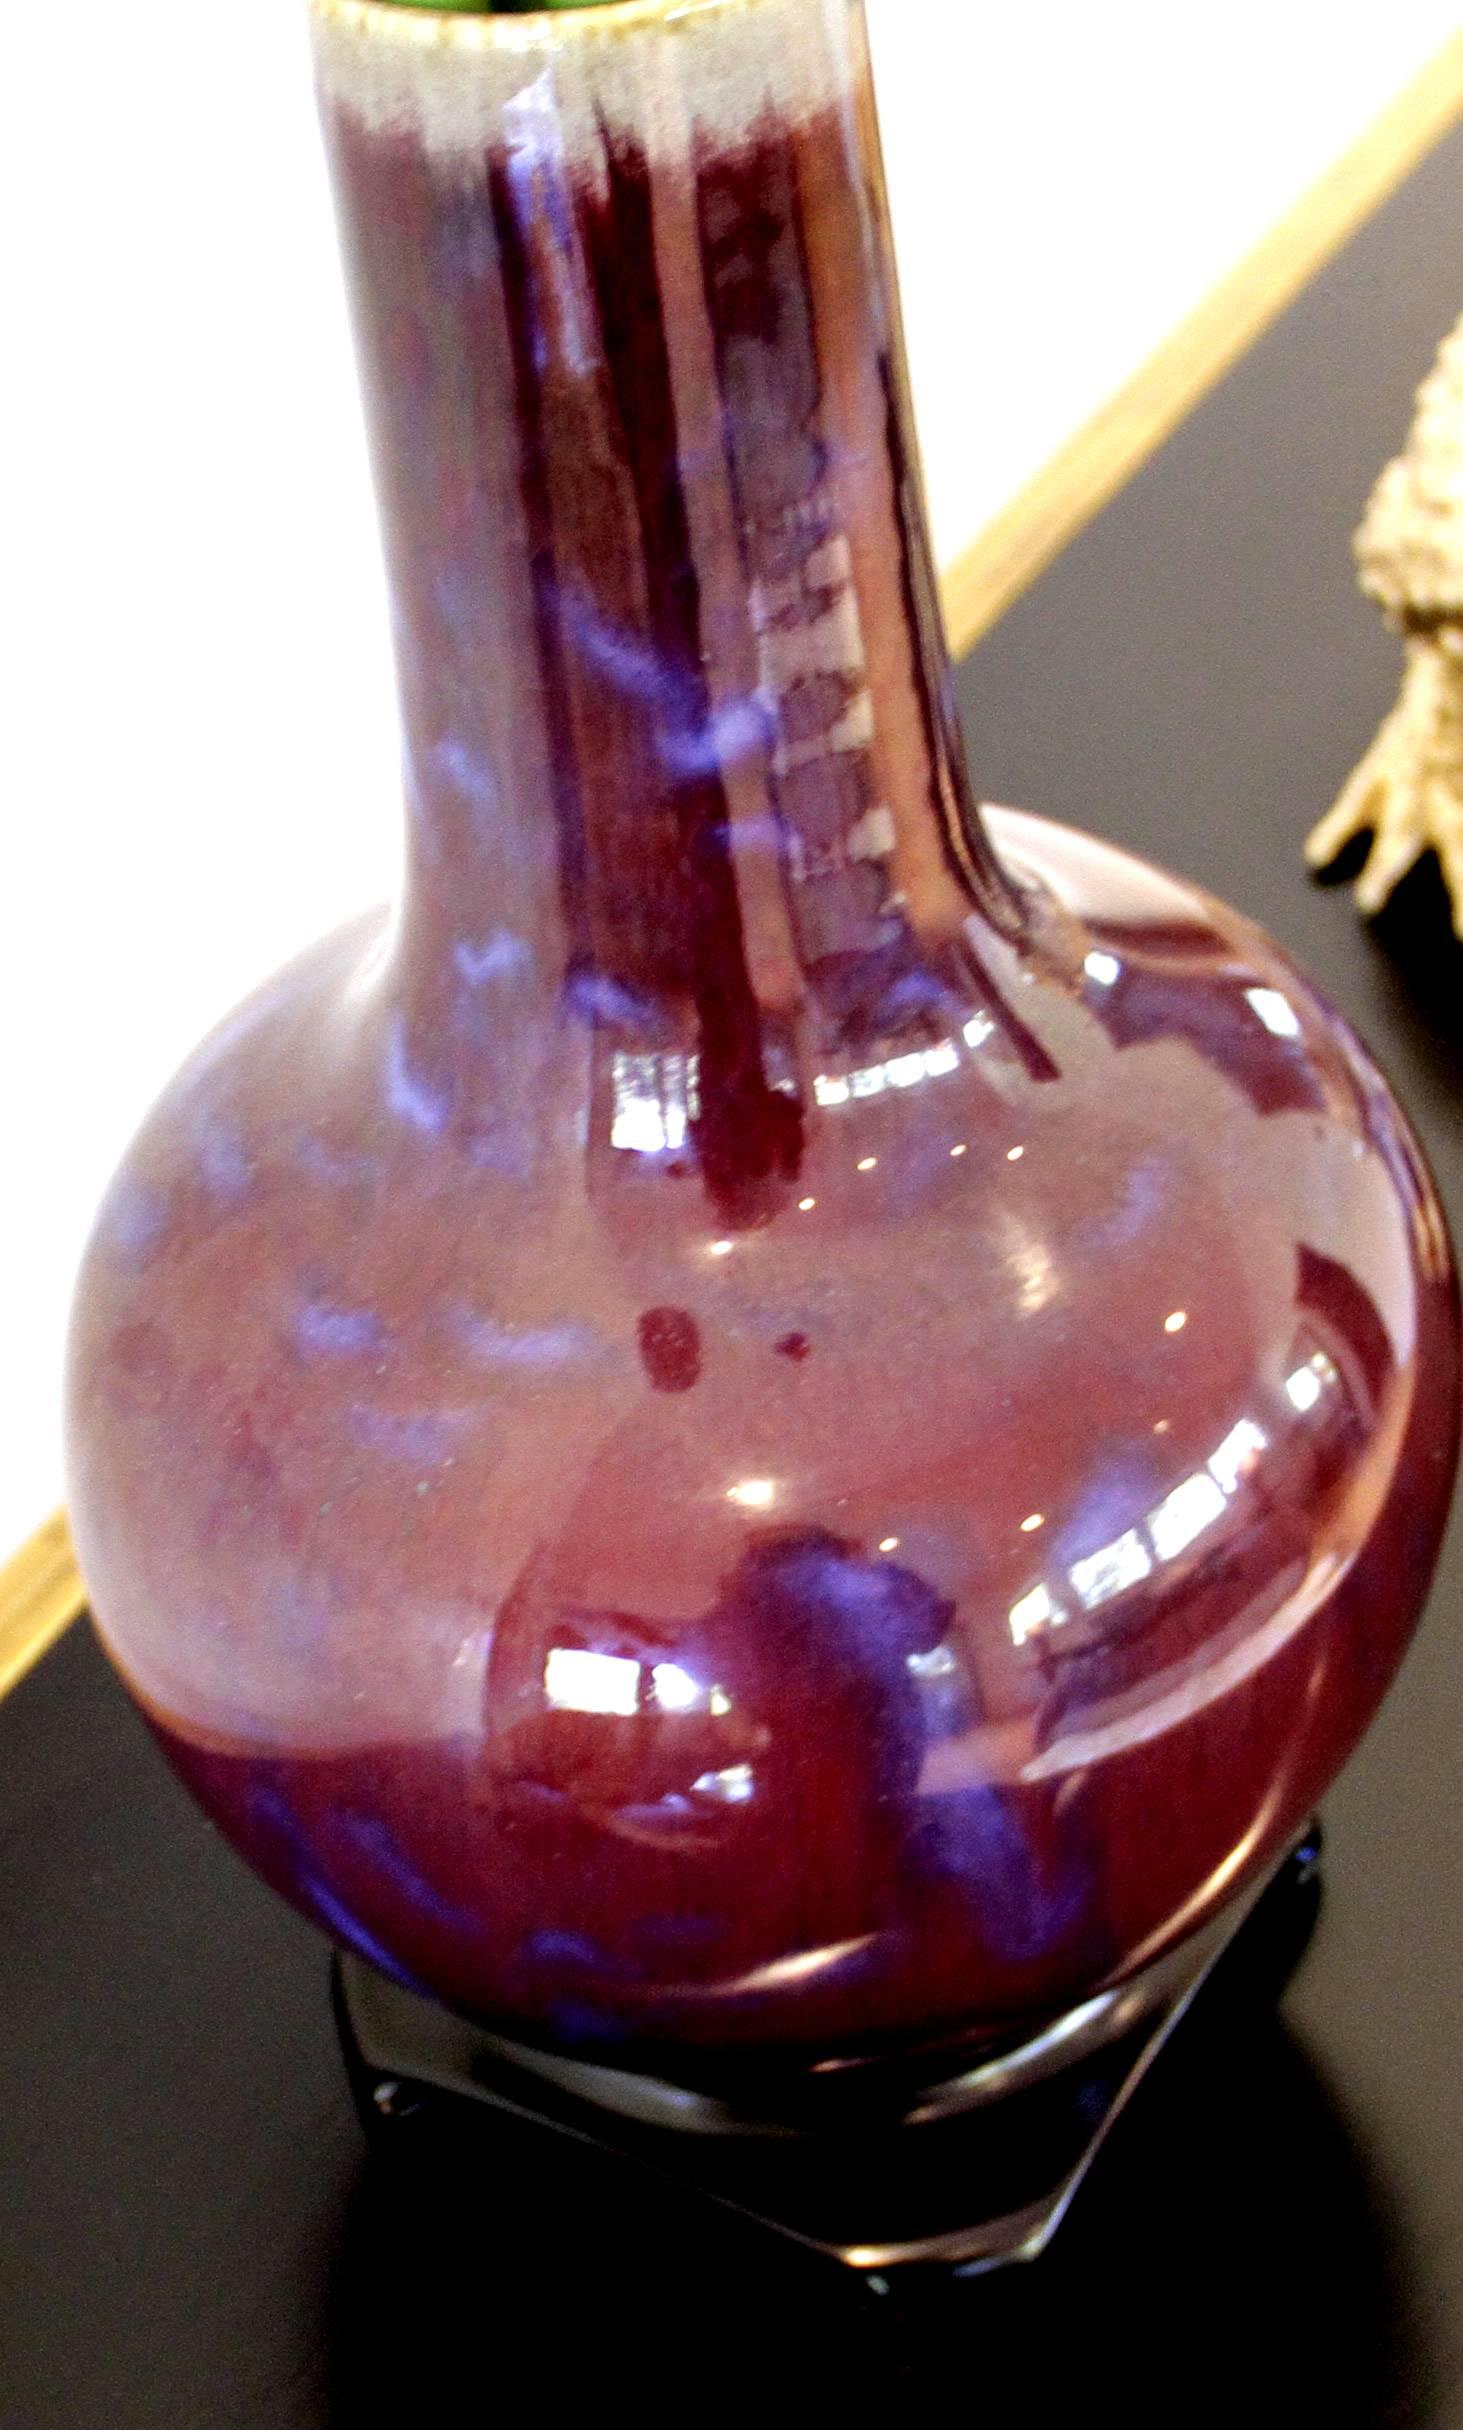 This vase from China dates back to circa 1908, from the Ching dynasty, Kwang-Hsu period. It is an excellent example of the pottery technique and color called oxblood. It comes with a wooden carved stand. Shown in additional photos are other items we